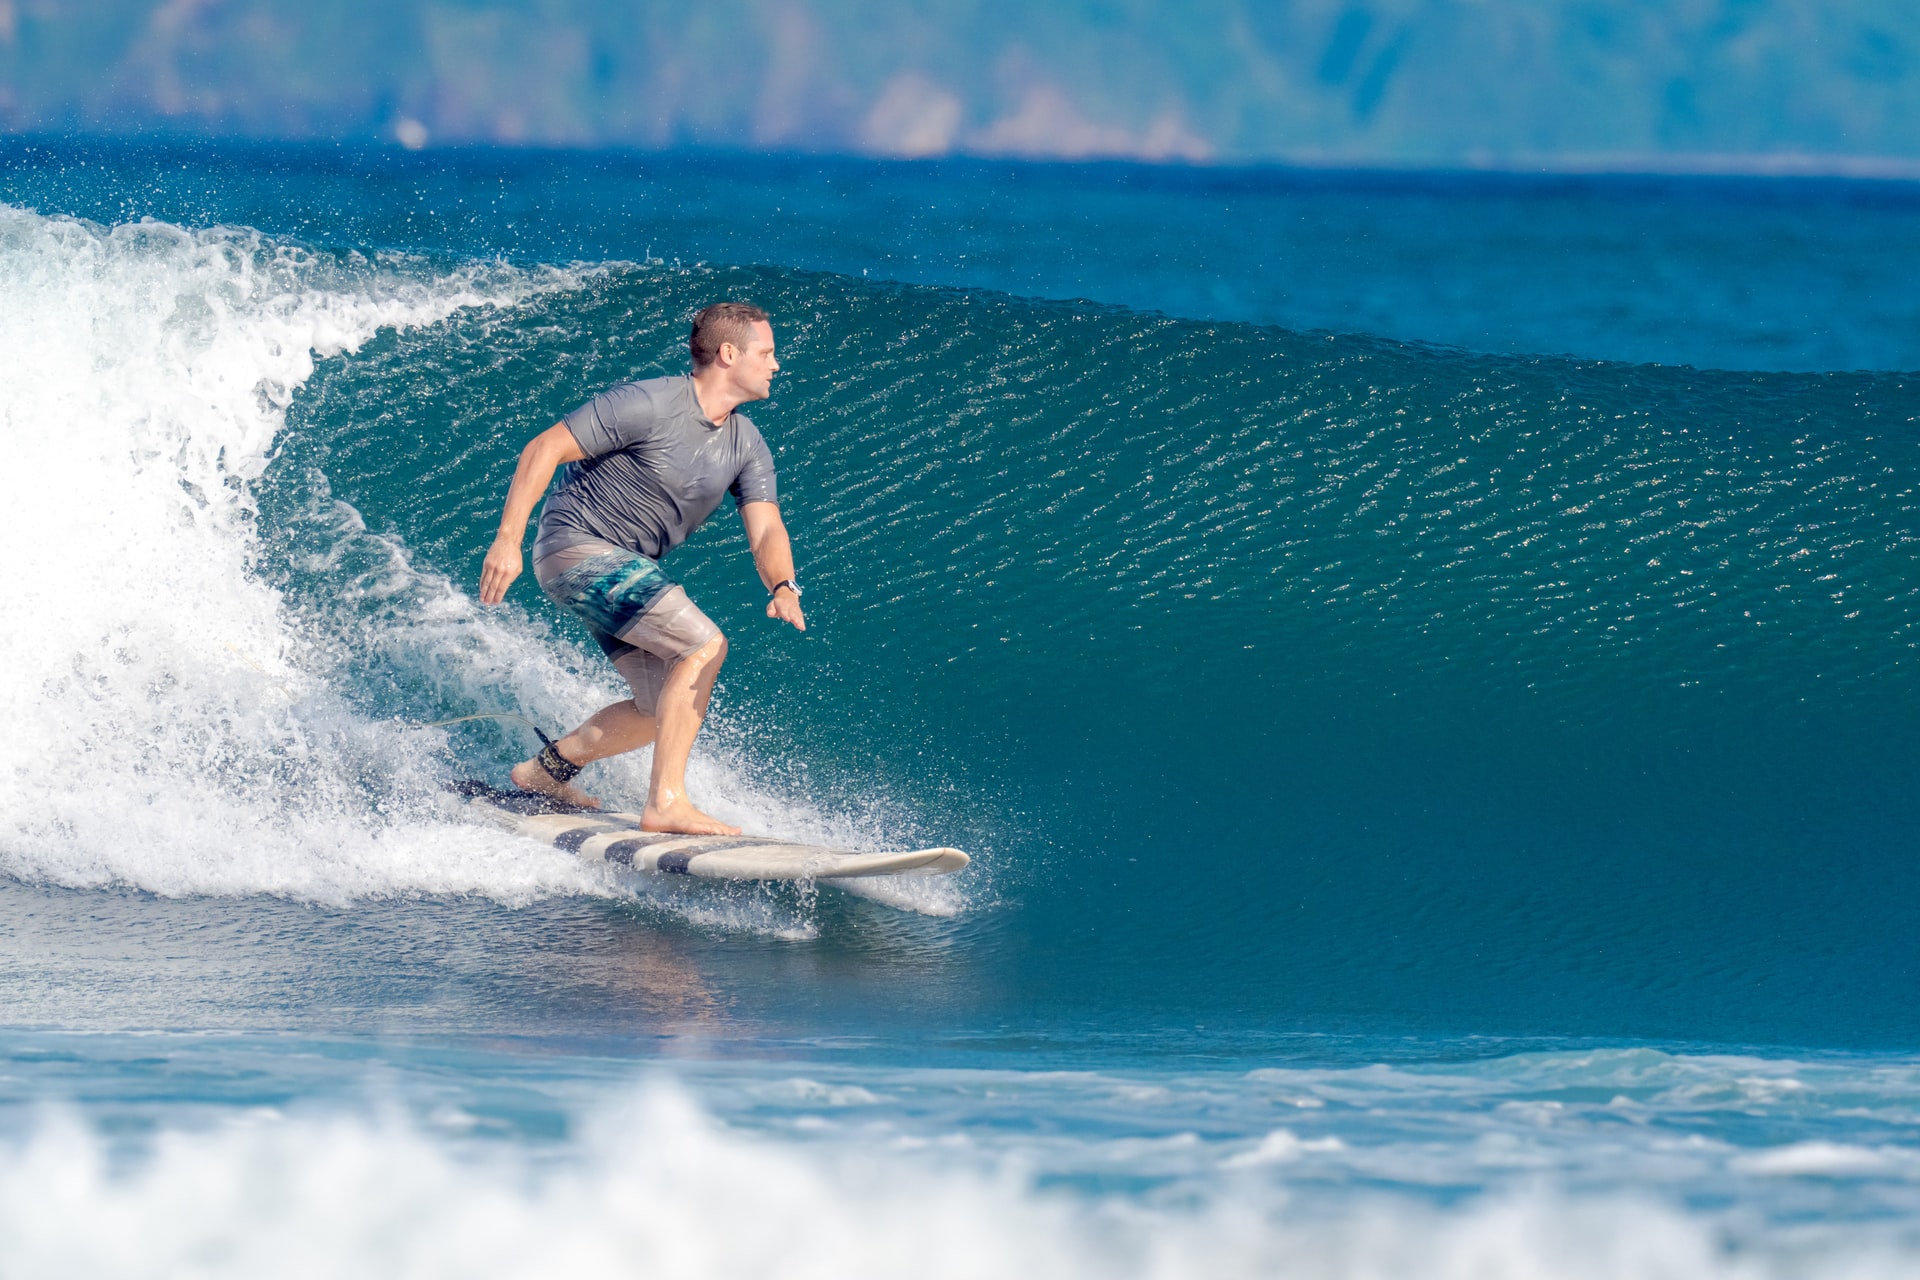 11 Practical Tips for Tall Surfers (+ Benefits & Downsides)